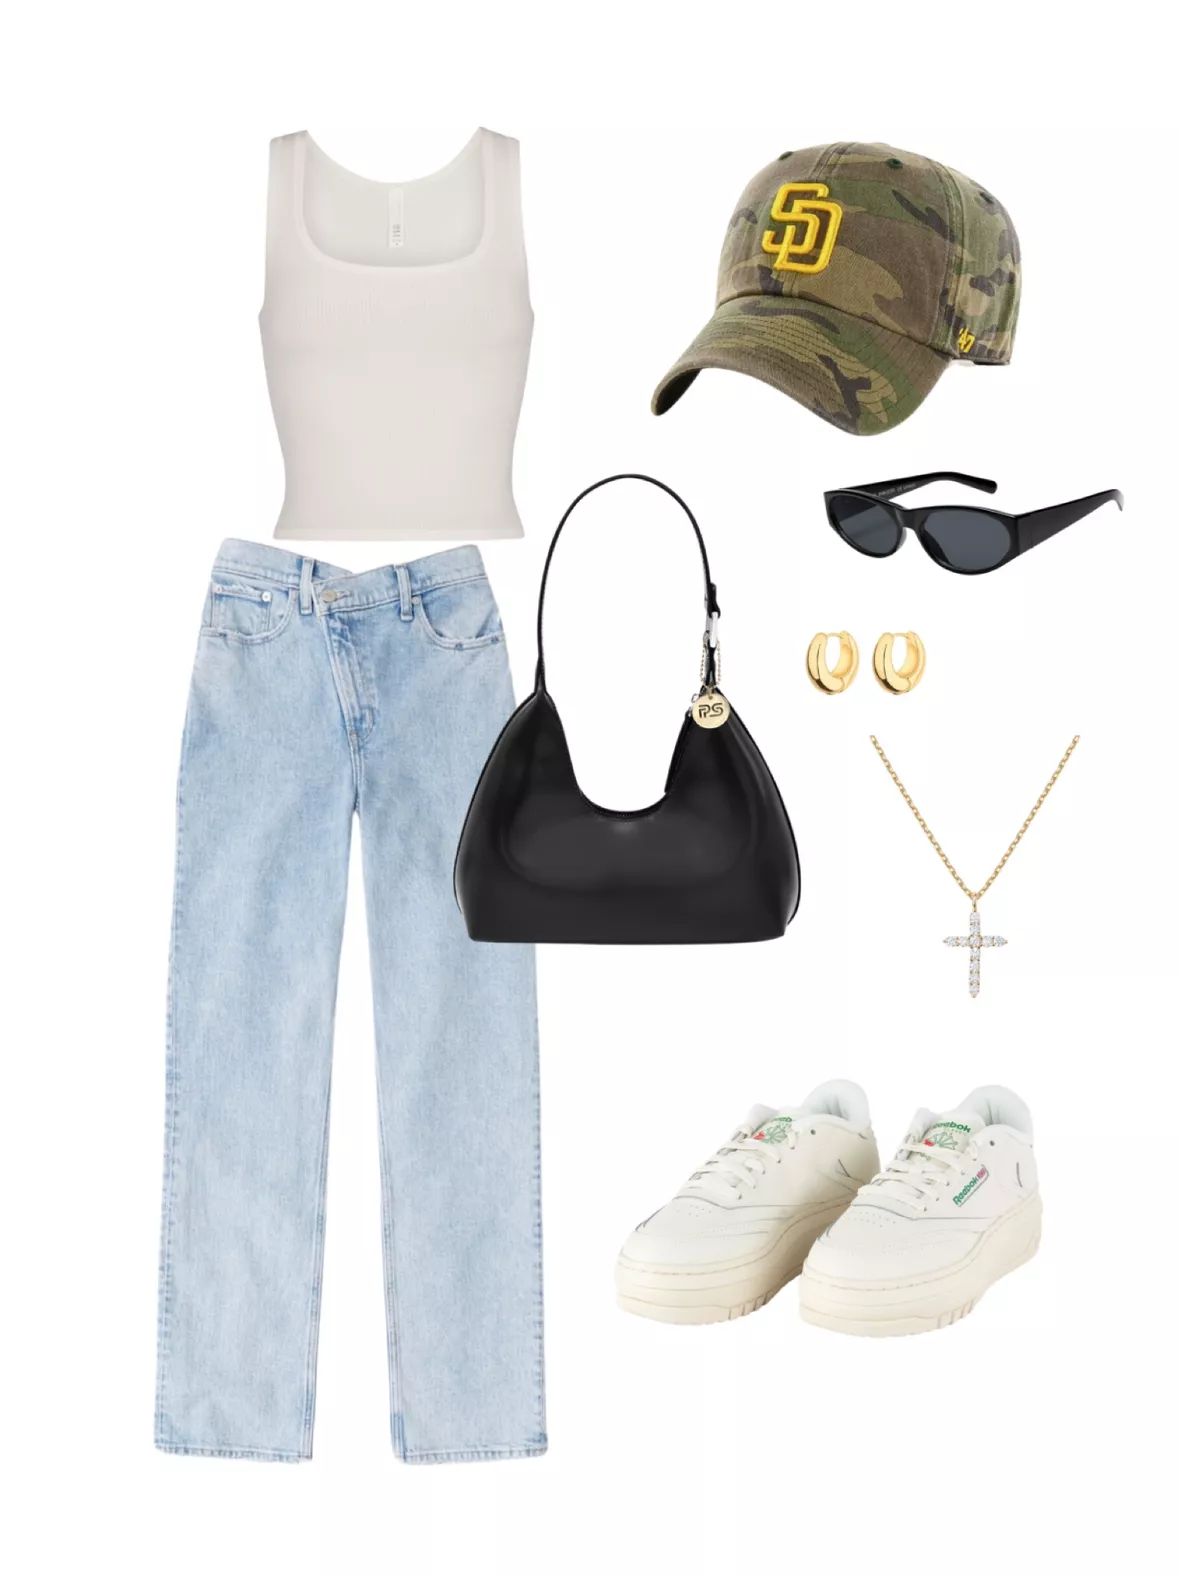 Baseball Game Outfit- San Diego Padres